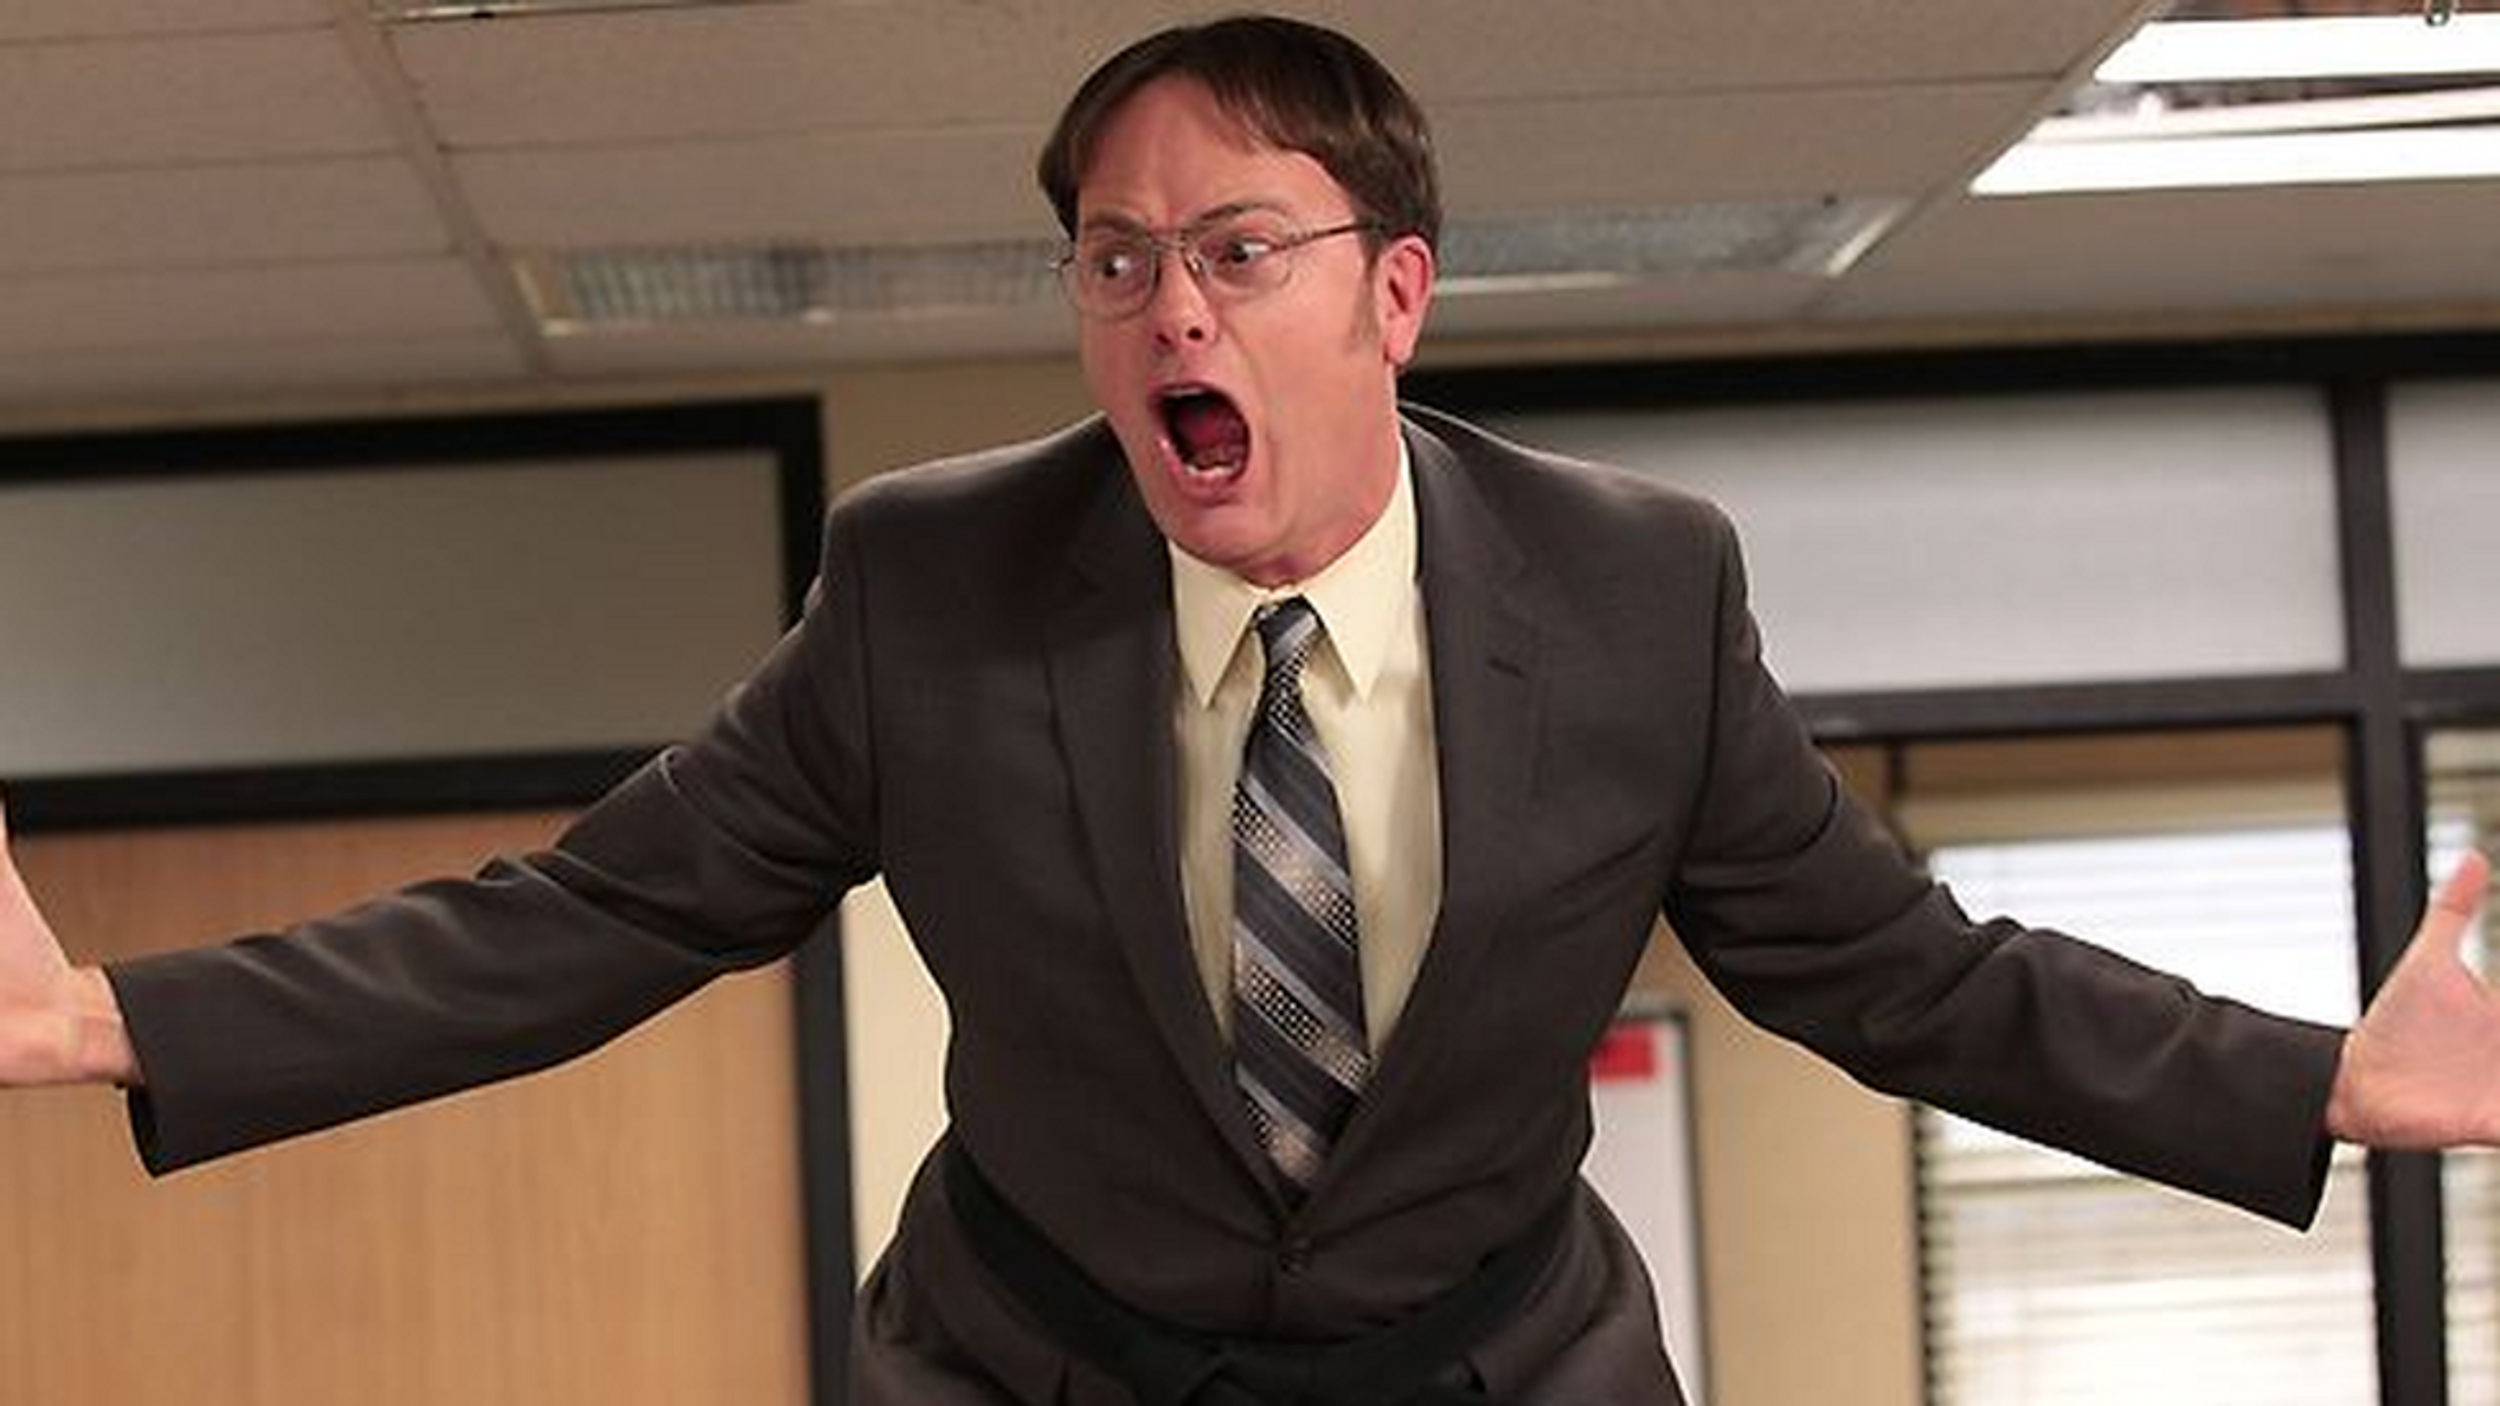 How College Students Feel At This Point In The Year As Told By The Office